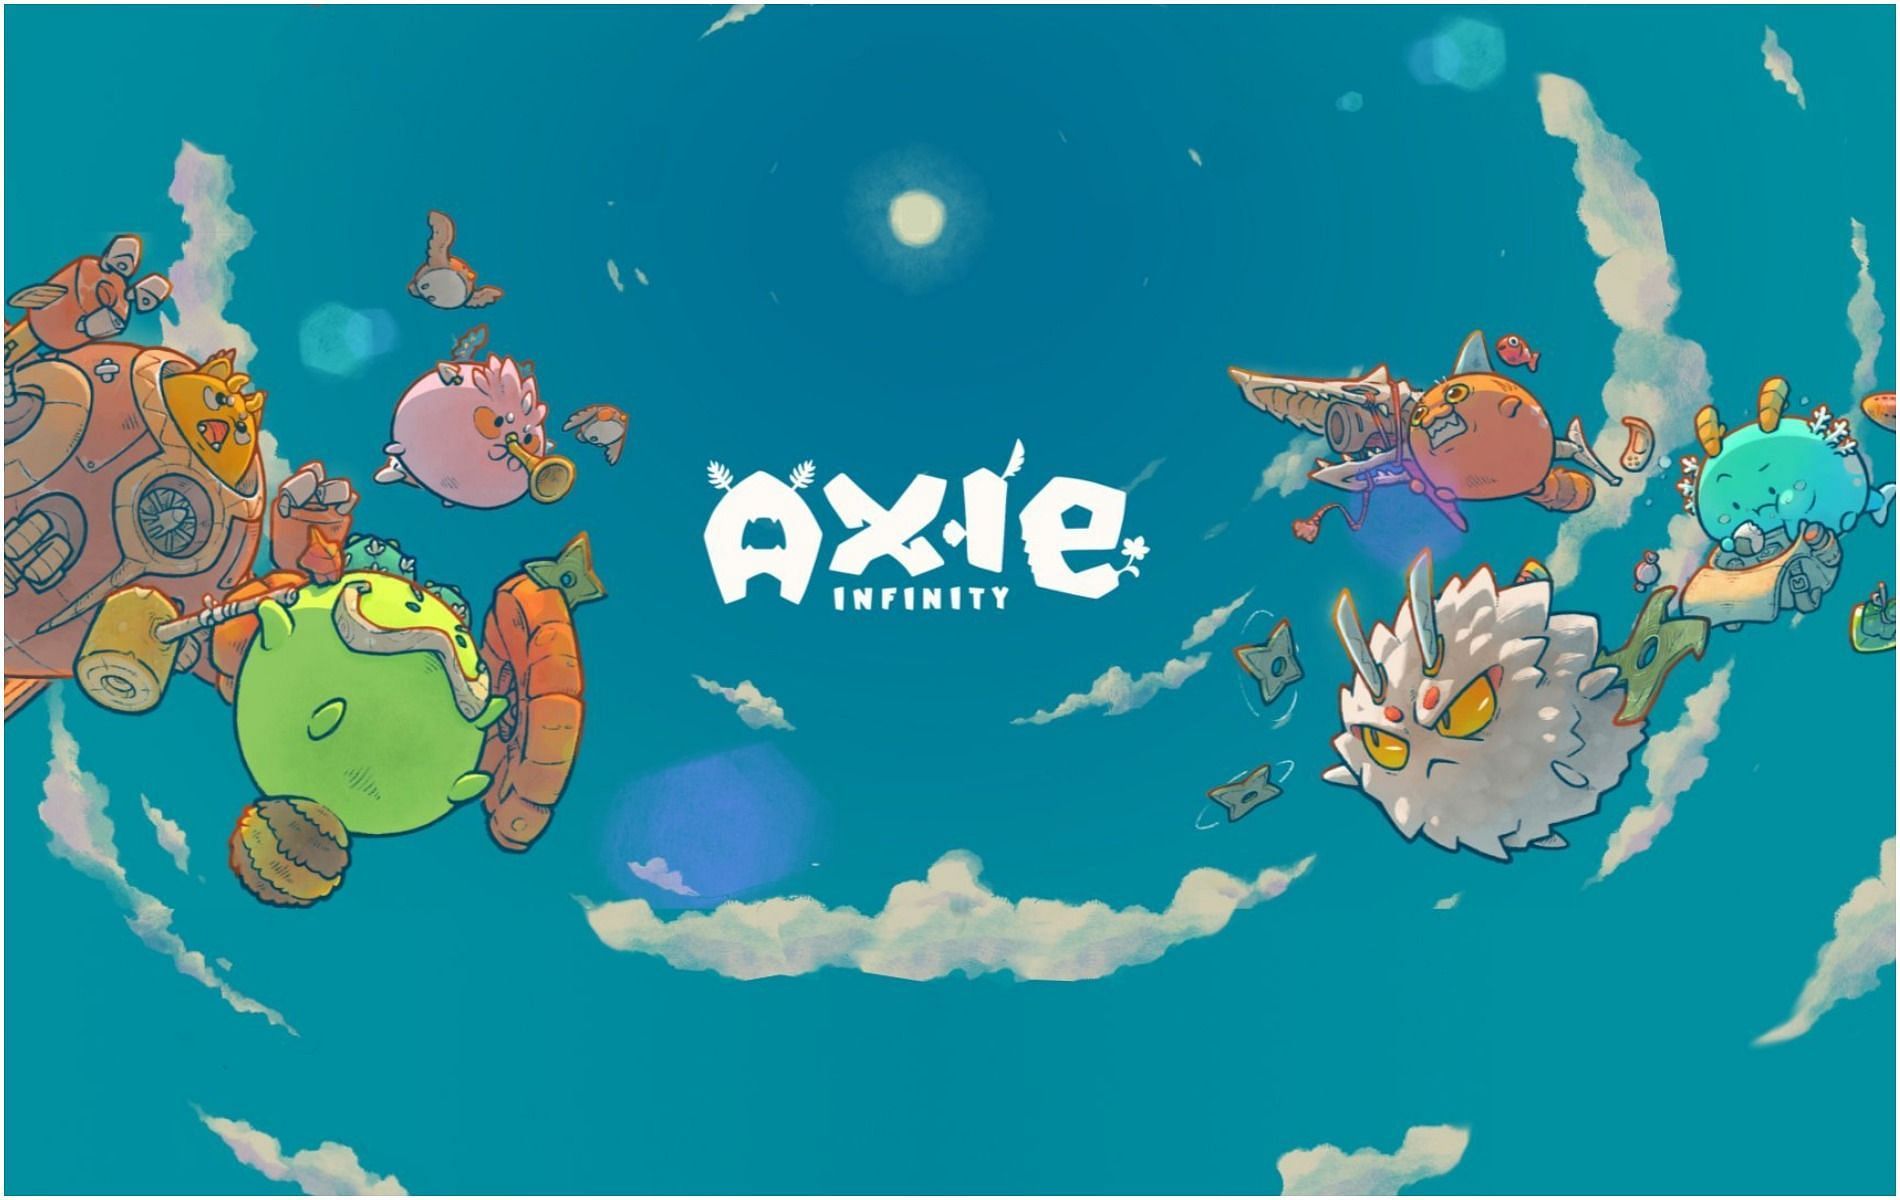 How Axie Infinity is shaping up to be a successful video game in the NFT industry (Image via Axie Infinity)